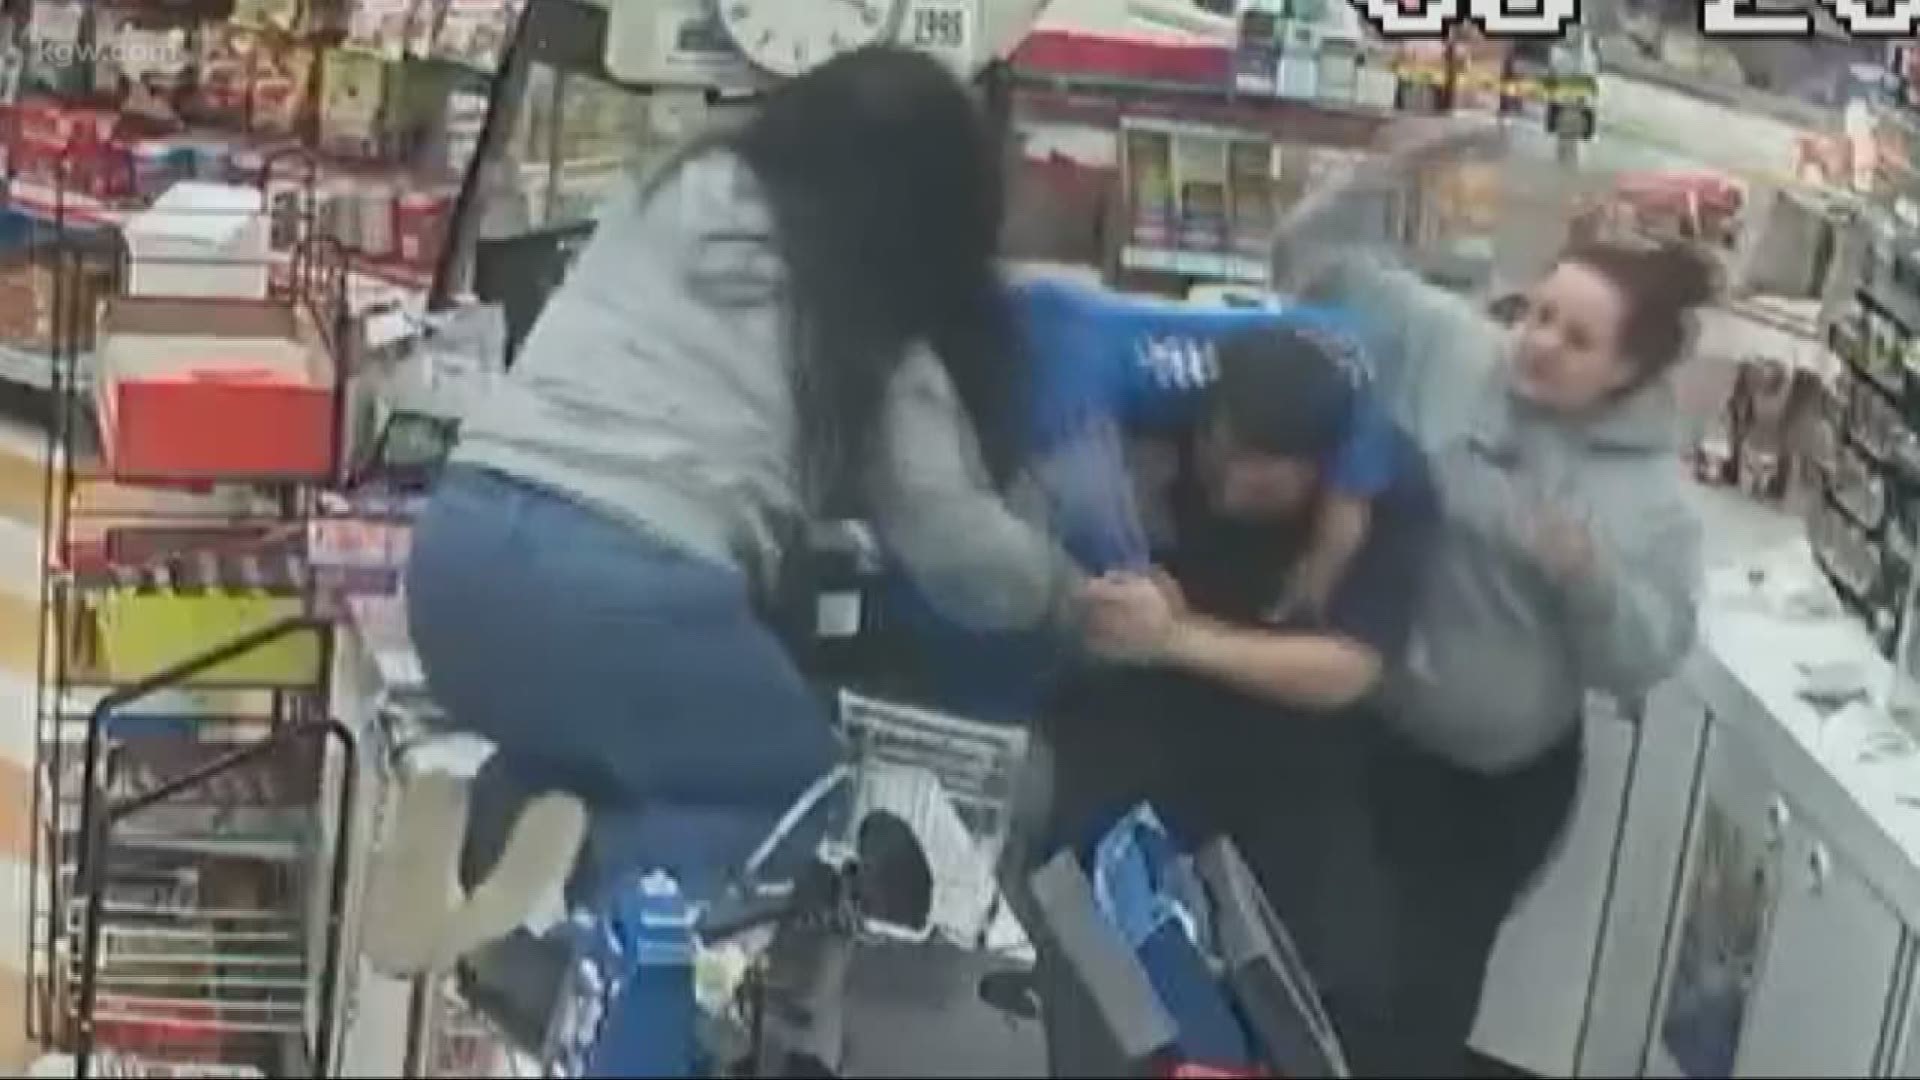 The mother of a clerk along with his boss are both in shock after a mob attacked the clerk and savagely beat him. "My heart breaks down because how a human can do something like this to another human," says Ray Abedini.